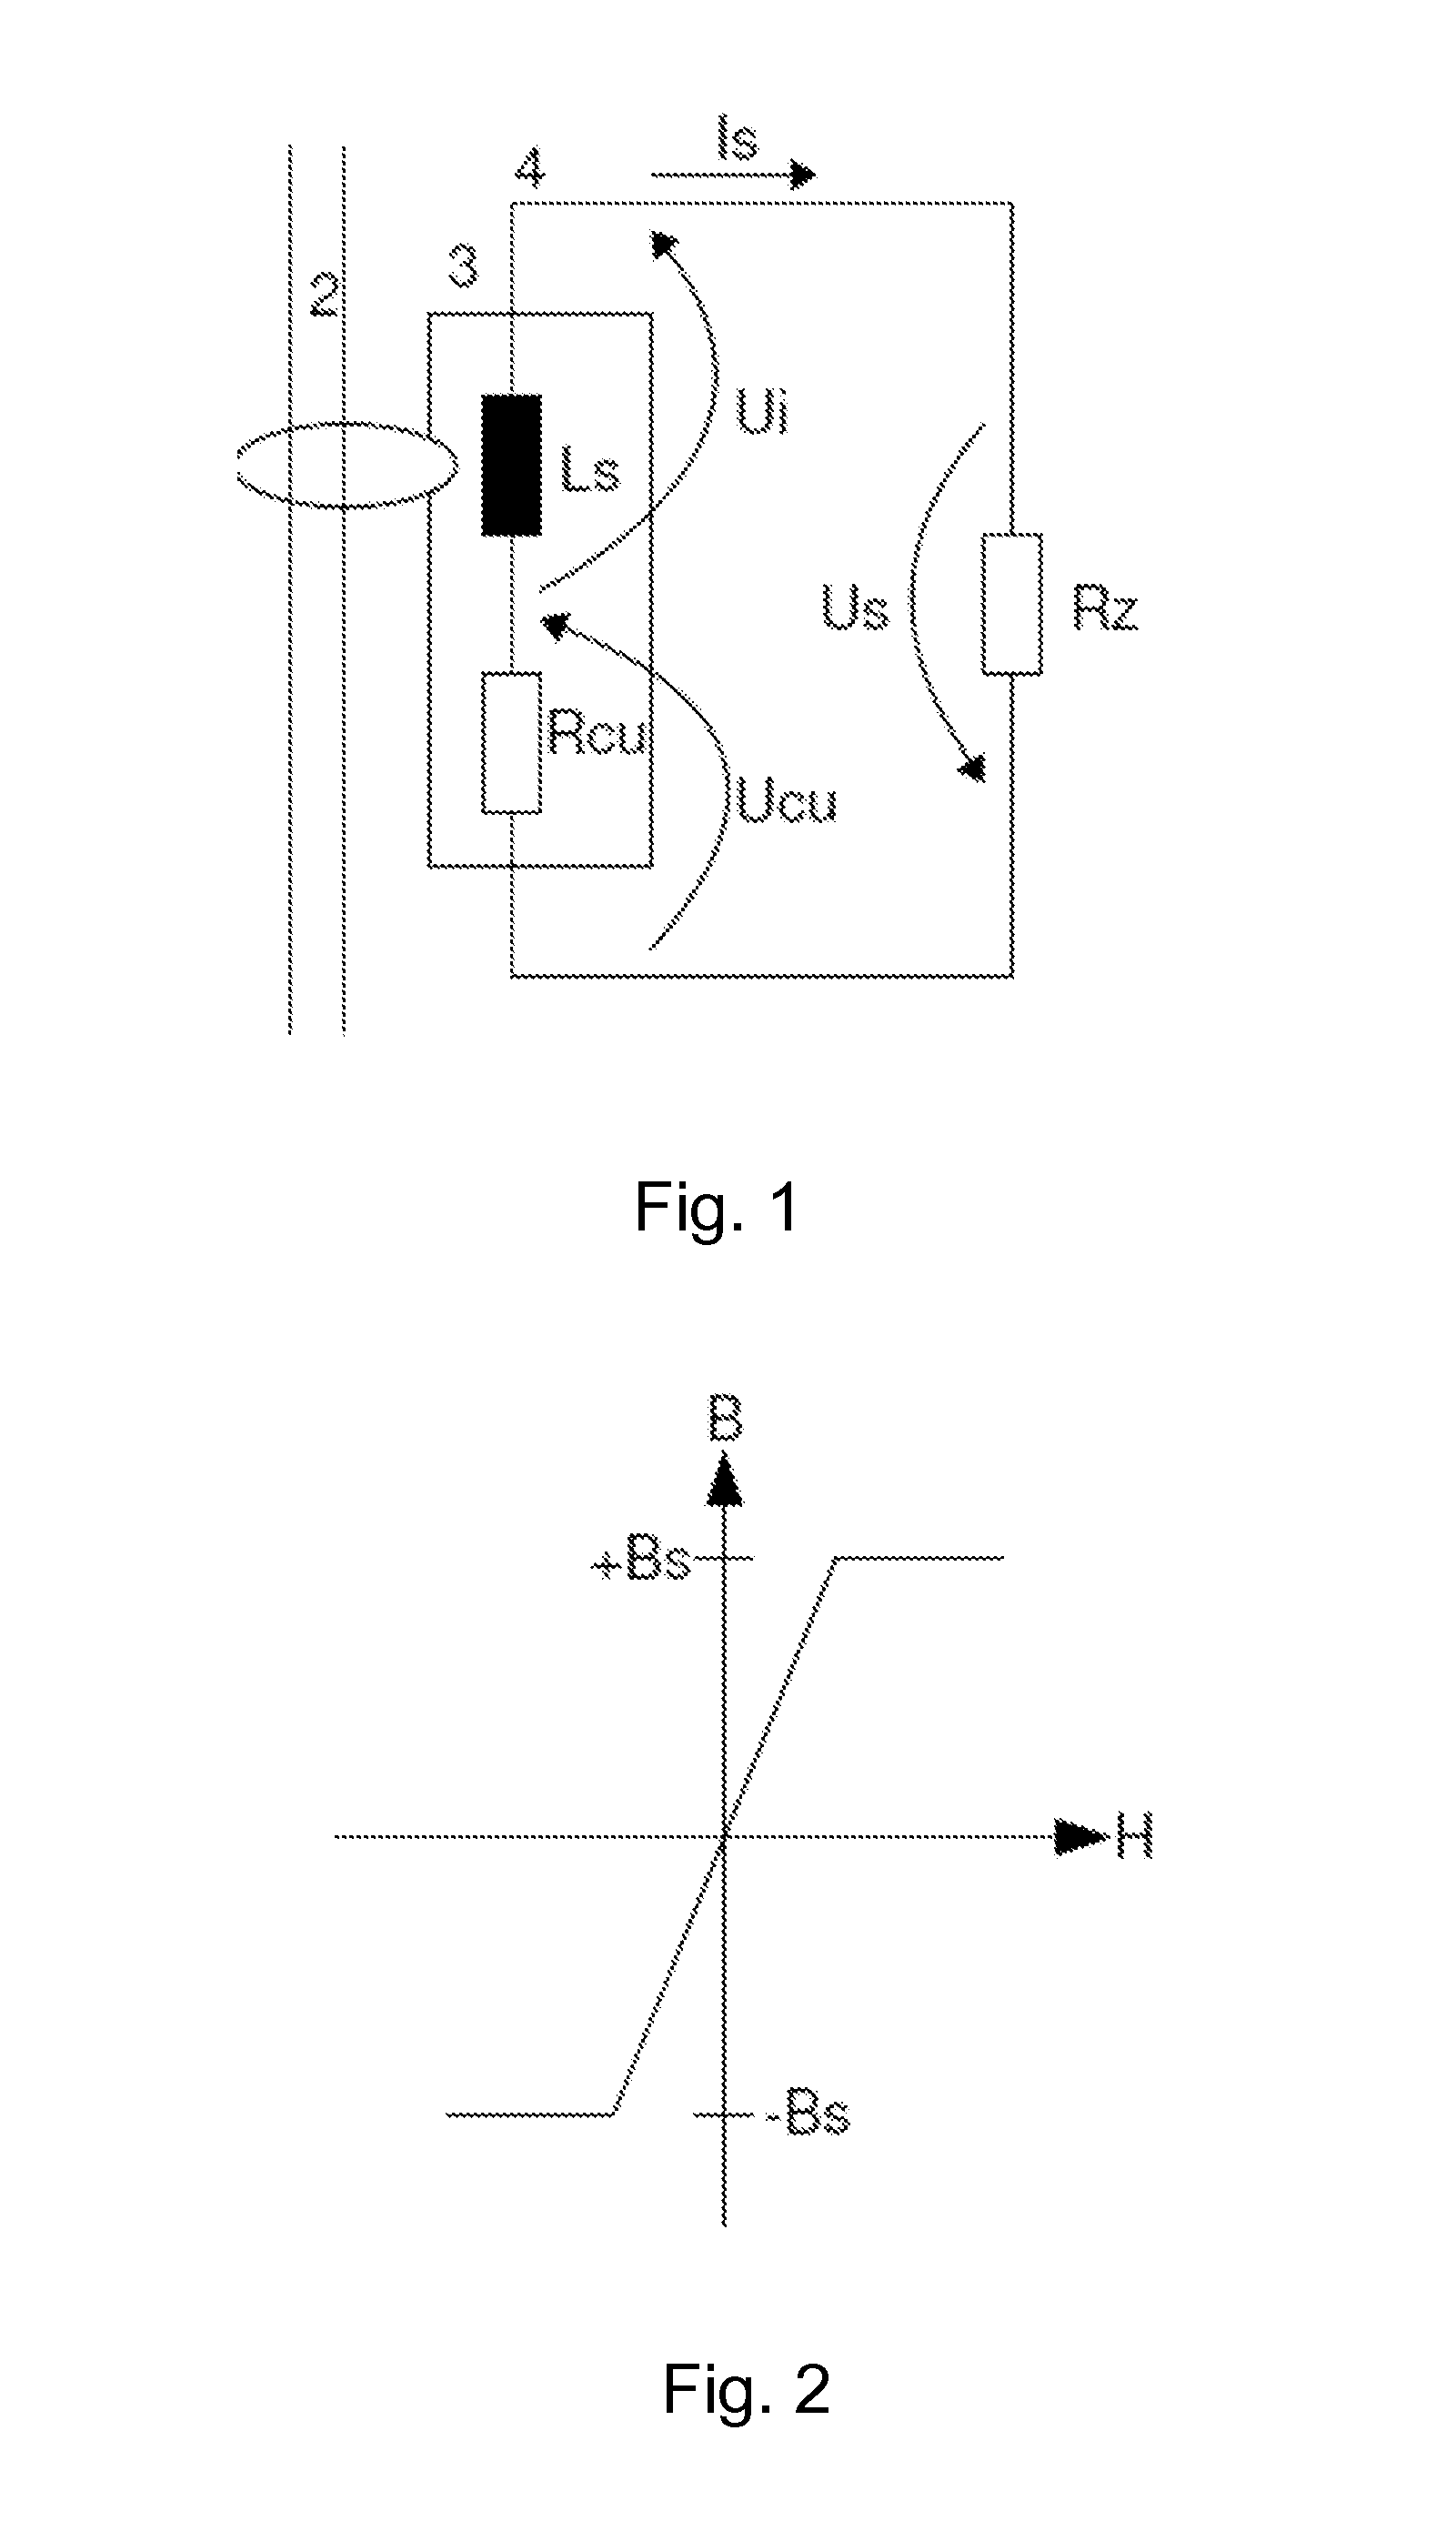 Method and Device for Measuring Electric Currents by Means of a Current Transformer